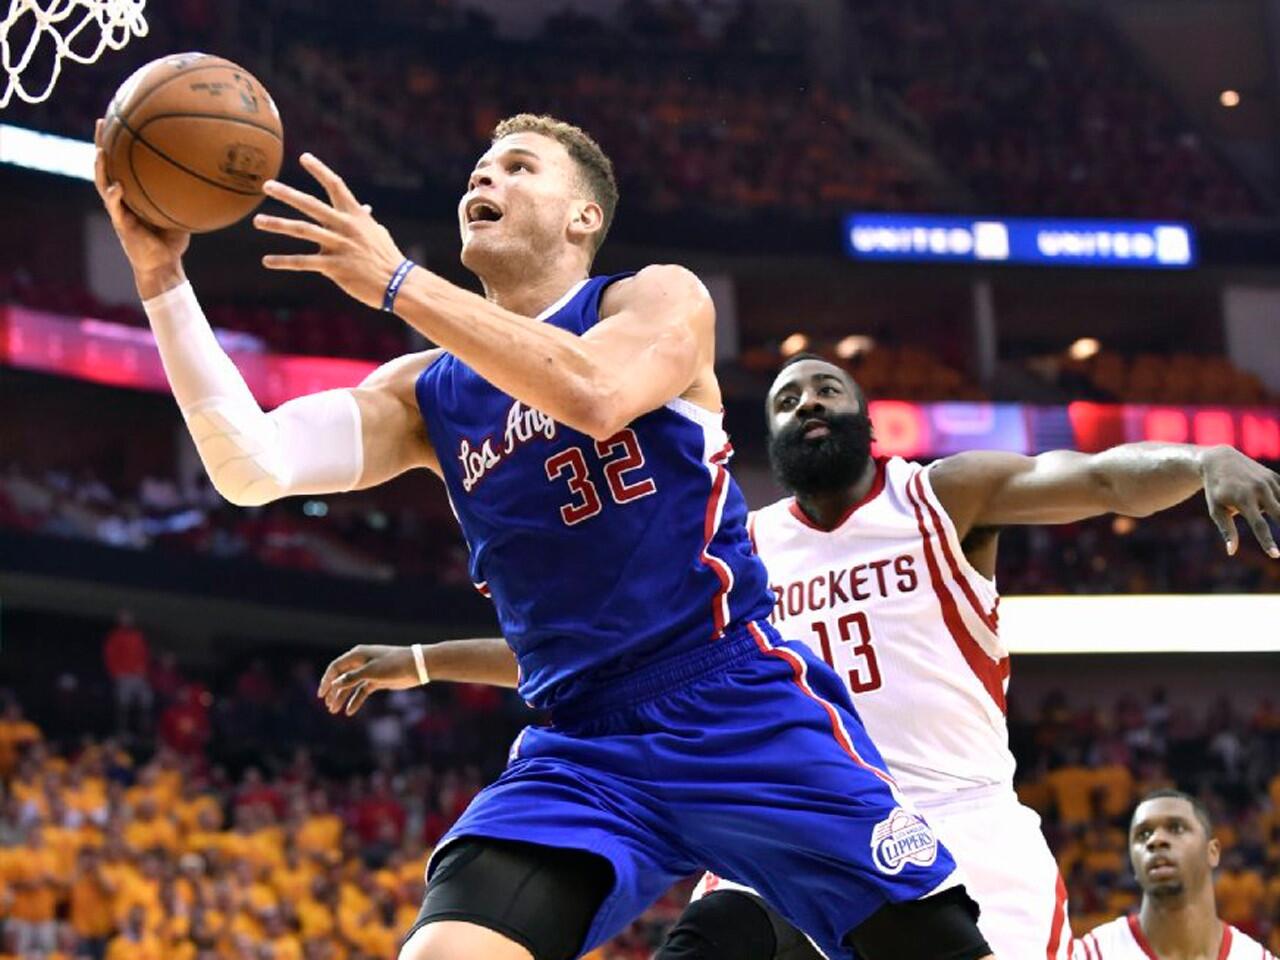 Blake Griffin beats Houston guard James Harden to the basket during the second quarter of Game 5 of the second round playoff series between the Clippers and the Rockets.